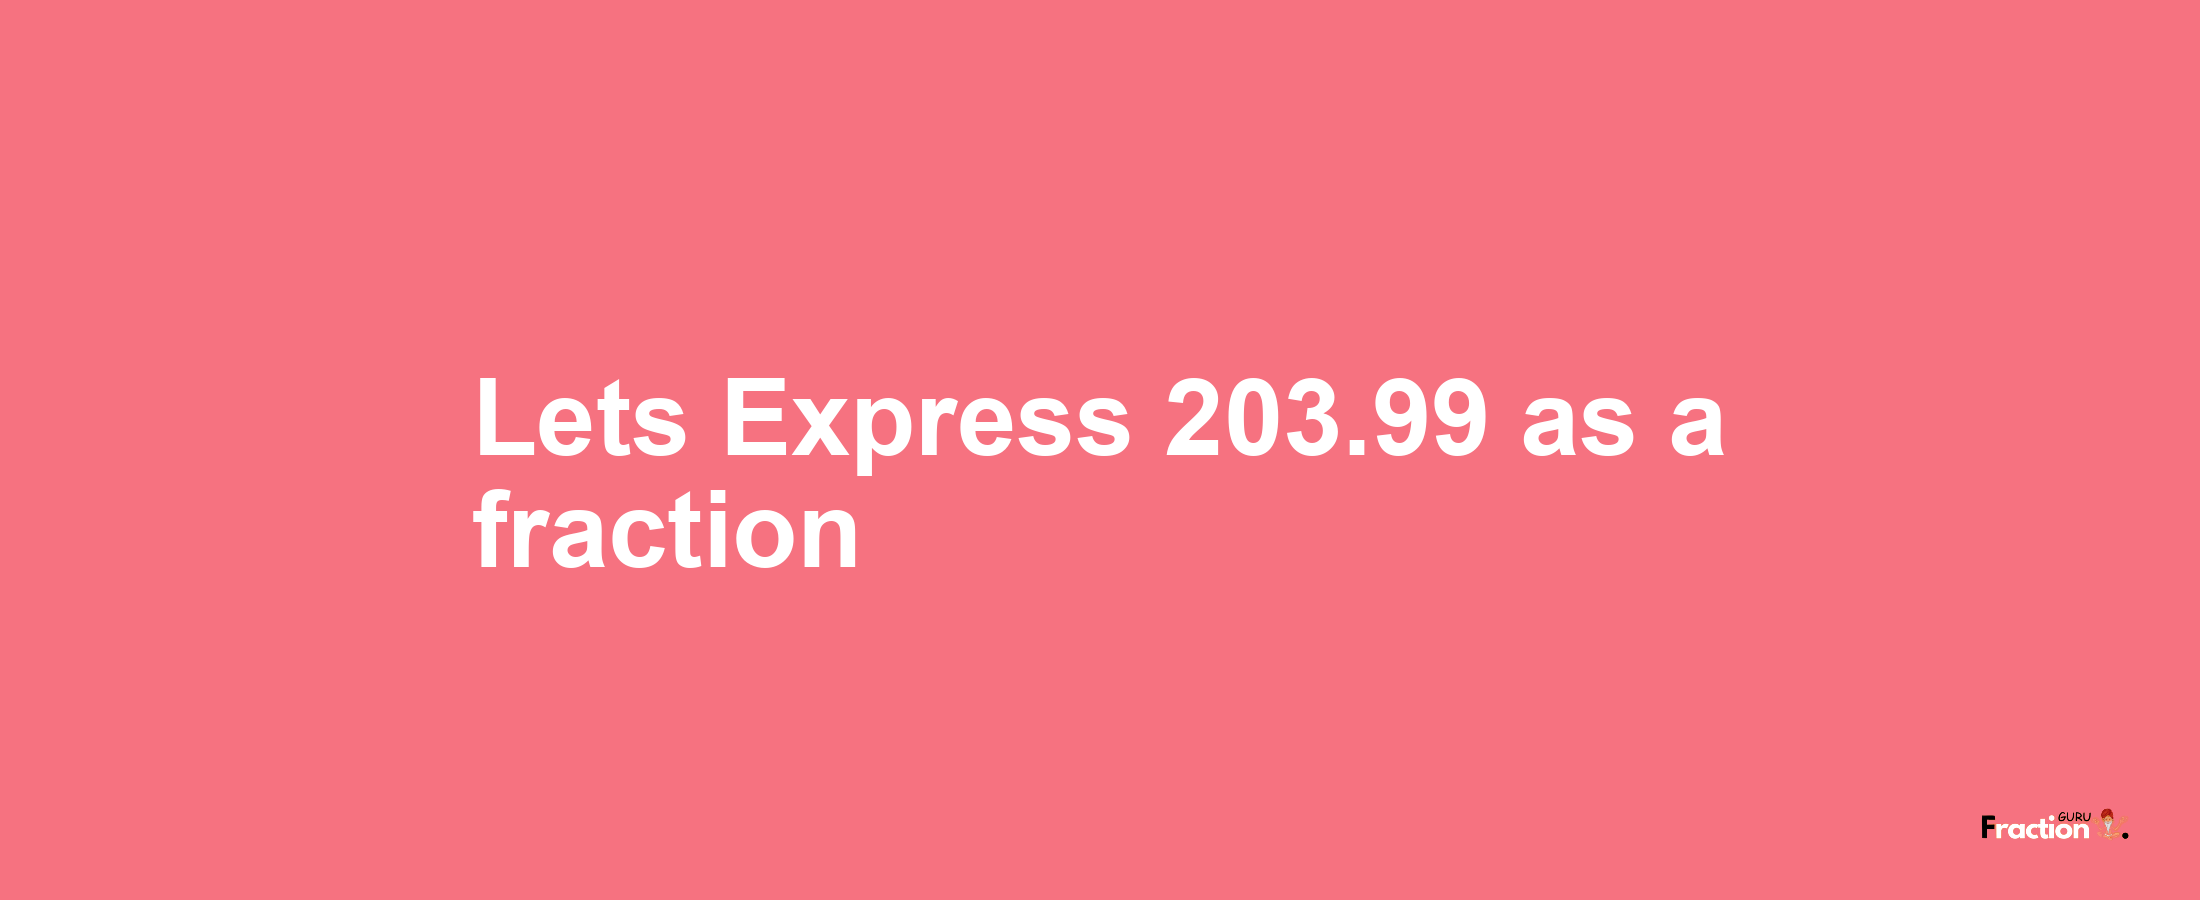 Lets Express 203.99 as afraction